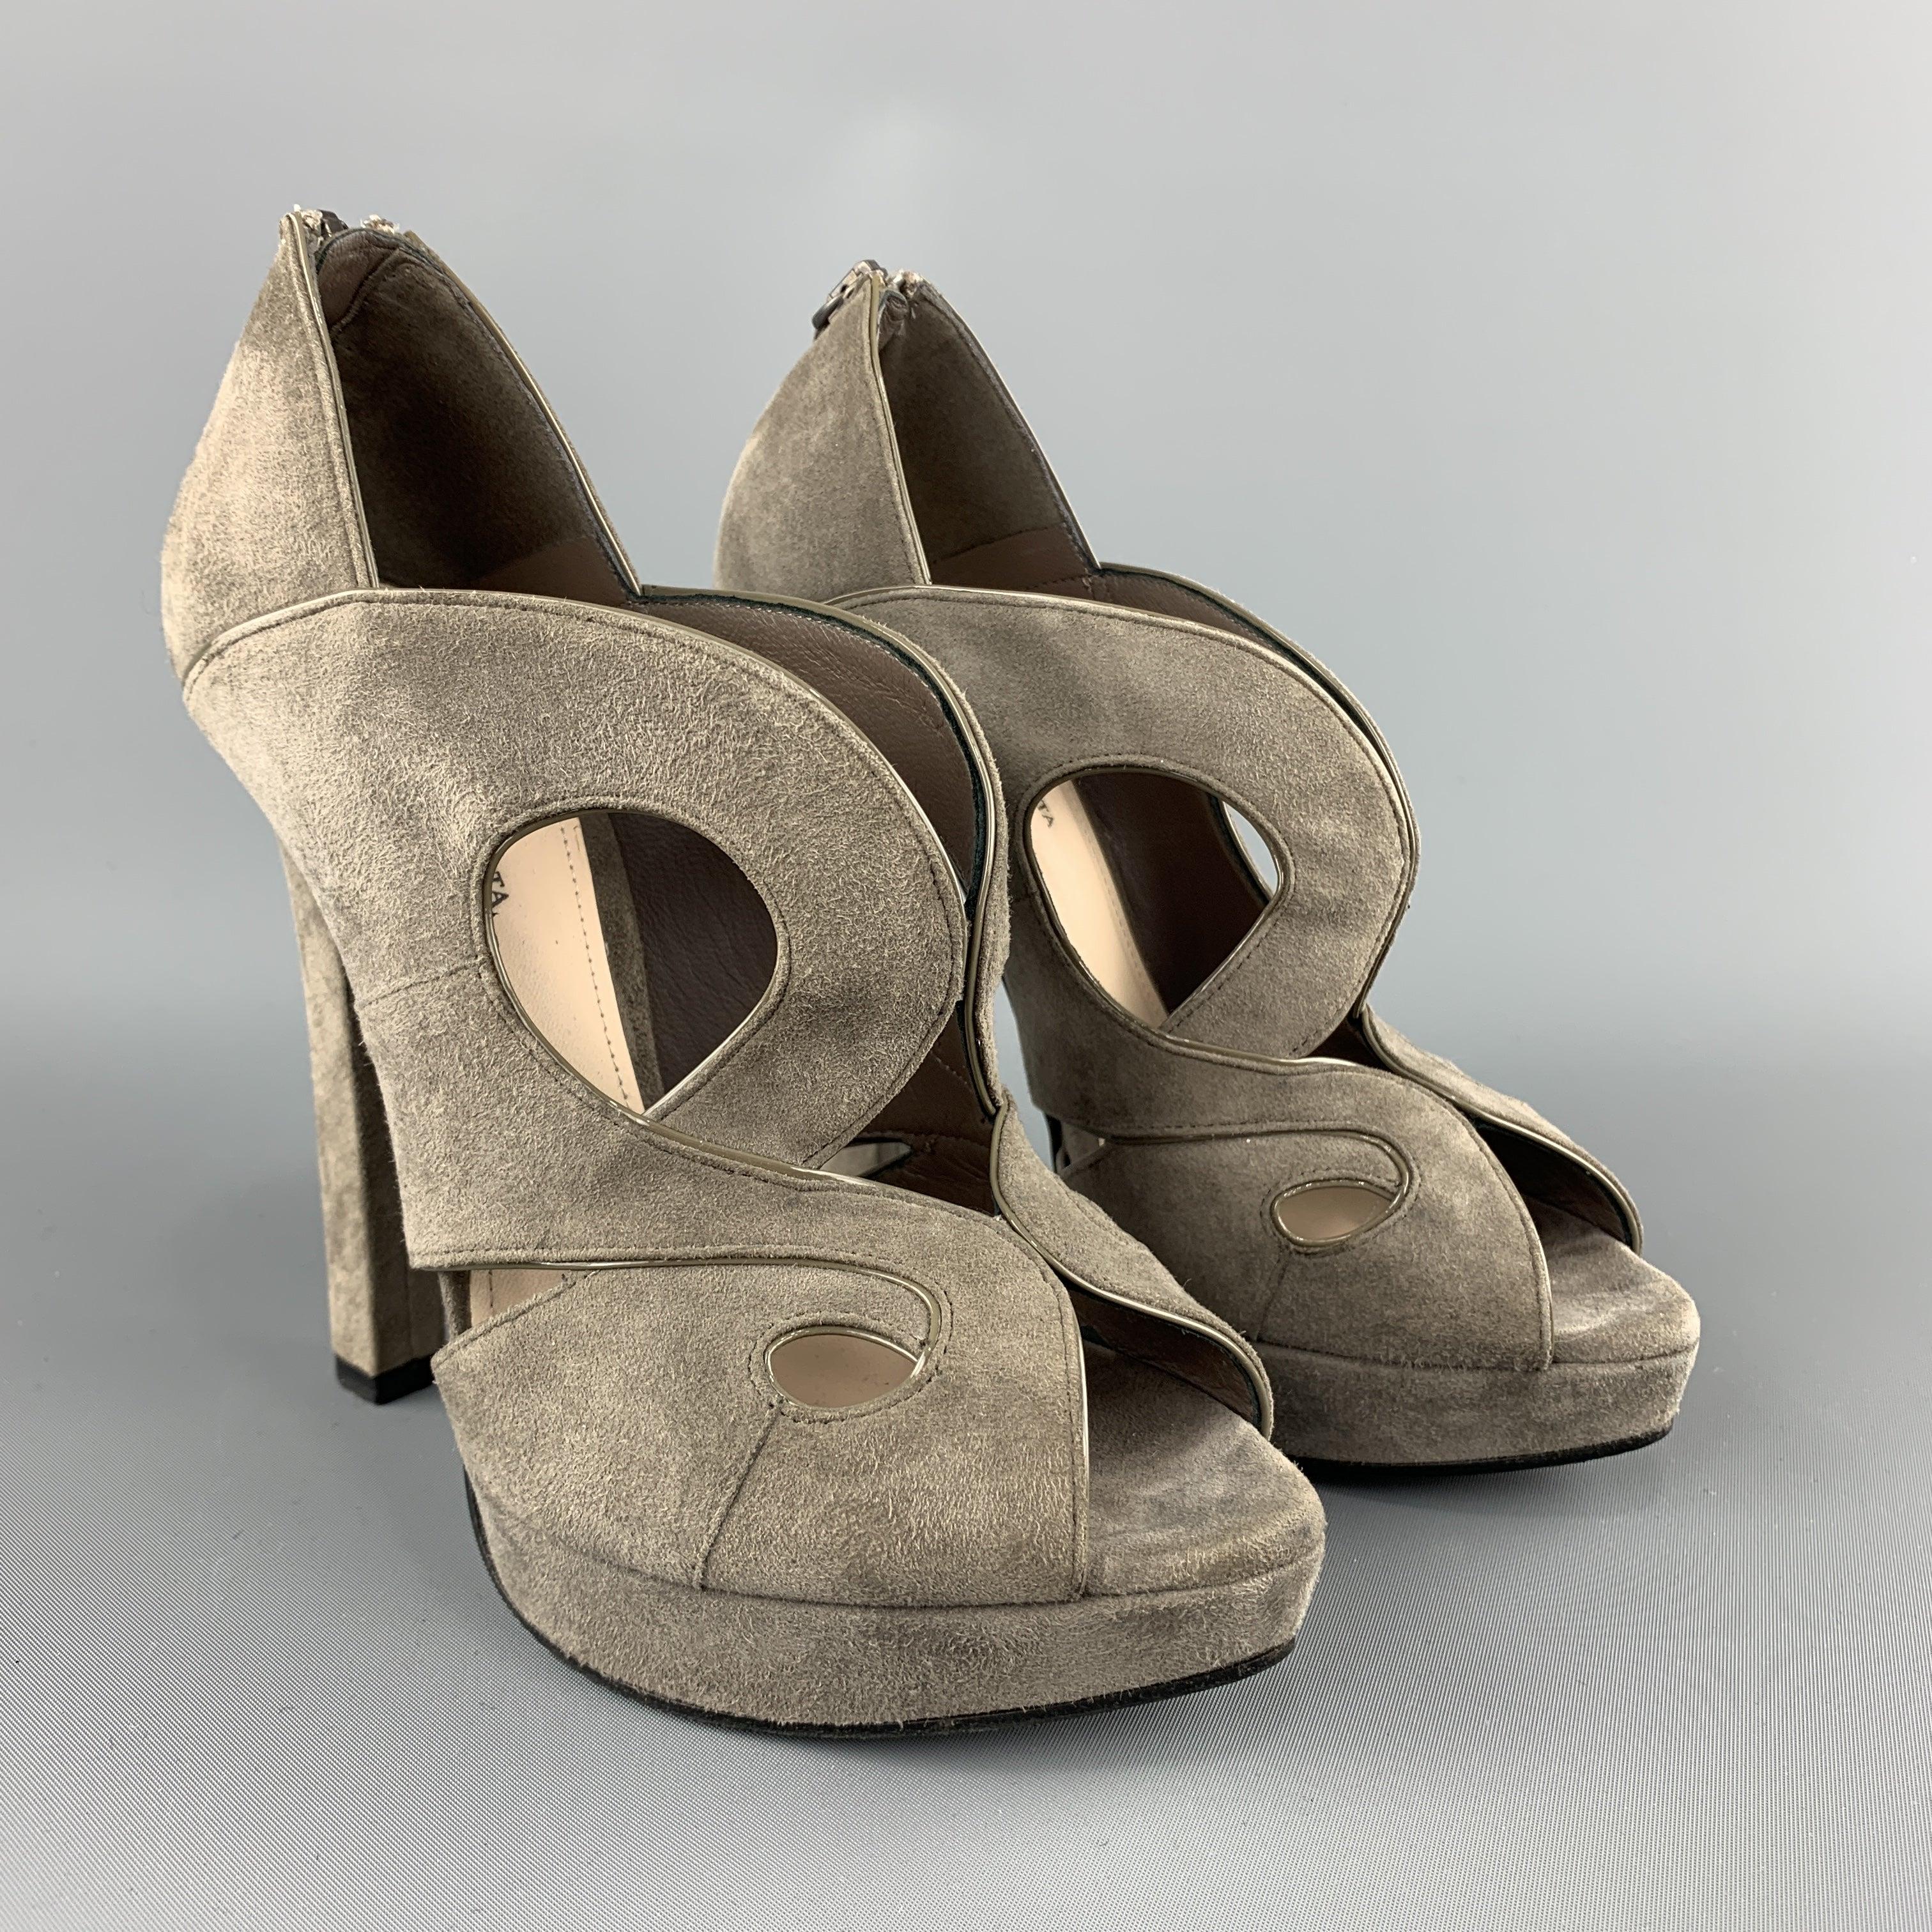 BOTTEGA VENETA sandals come in taupe gray suede with a covered heel, cutouts, peep toe, and patent leather piping. Made in Italy.
Very Good Pre-Owned Condition.
 

Marked:   IT 37
 

Measurements: 
  
l	Heel: 5 inches 
l	Platform: 0.75 inches 

  
 